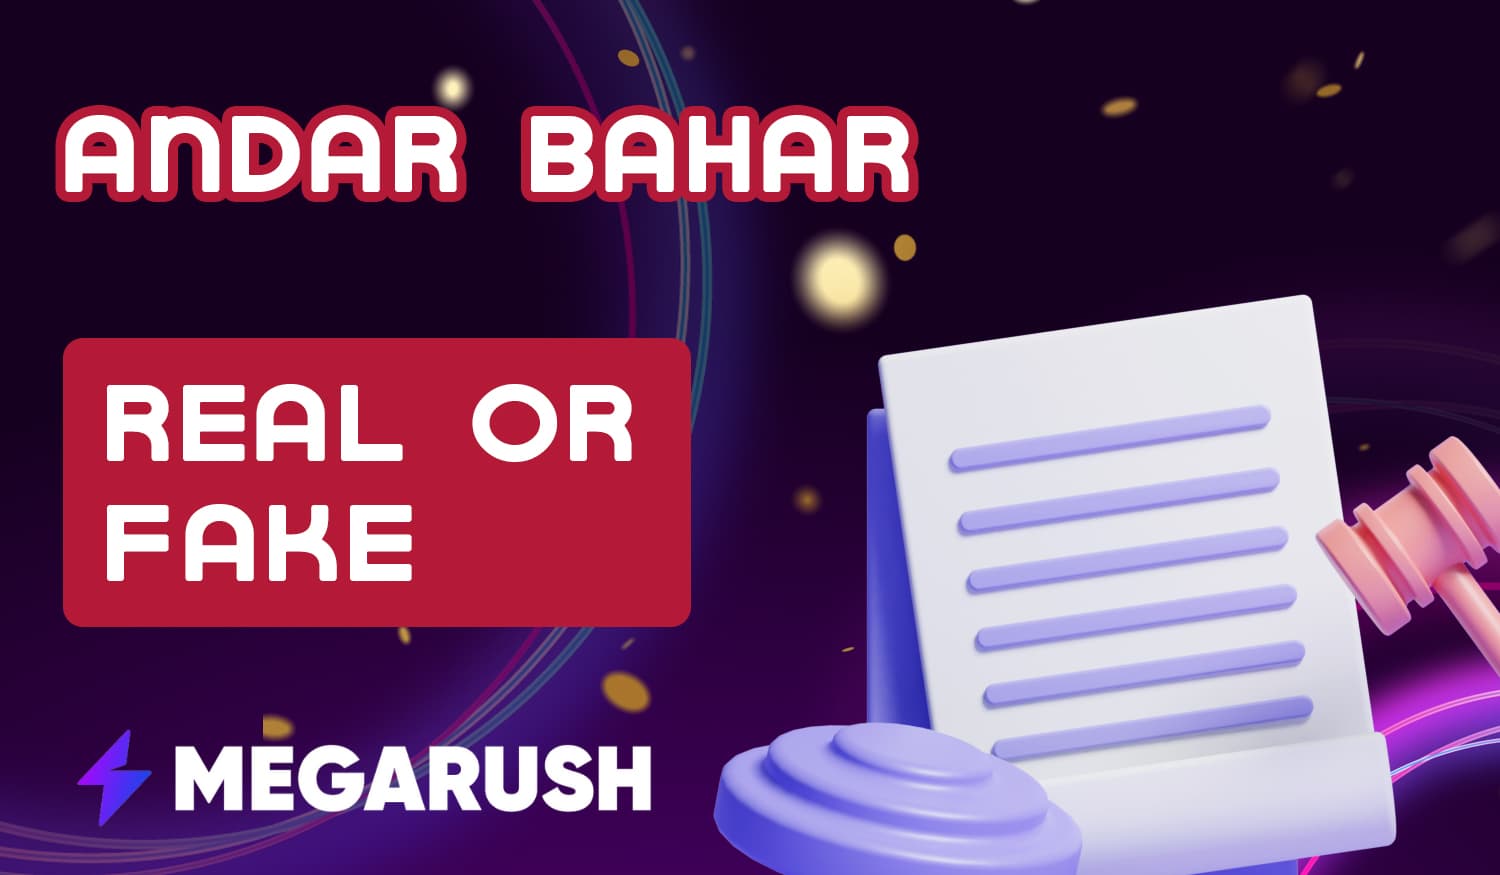 Legality of Megarush online casino for andar bahar fans from India